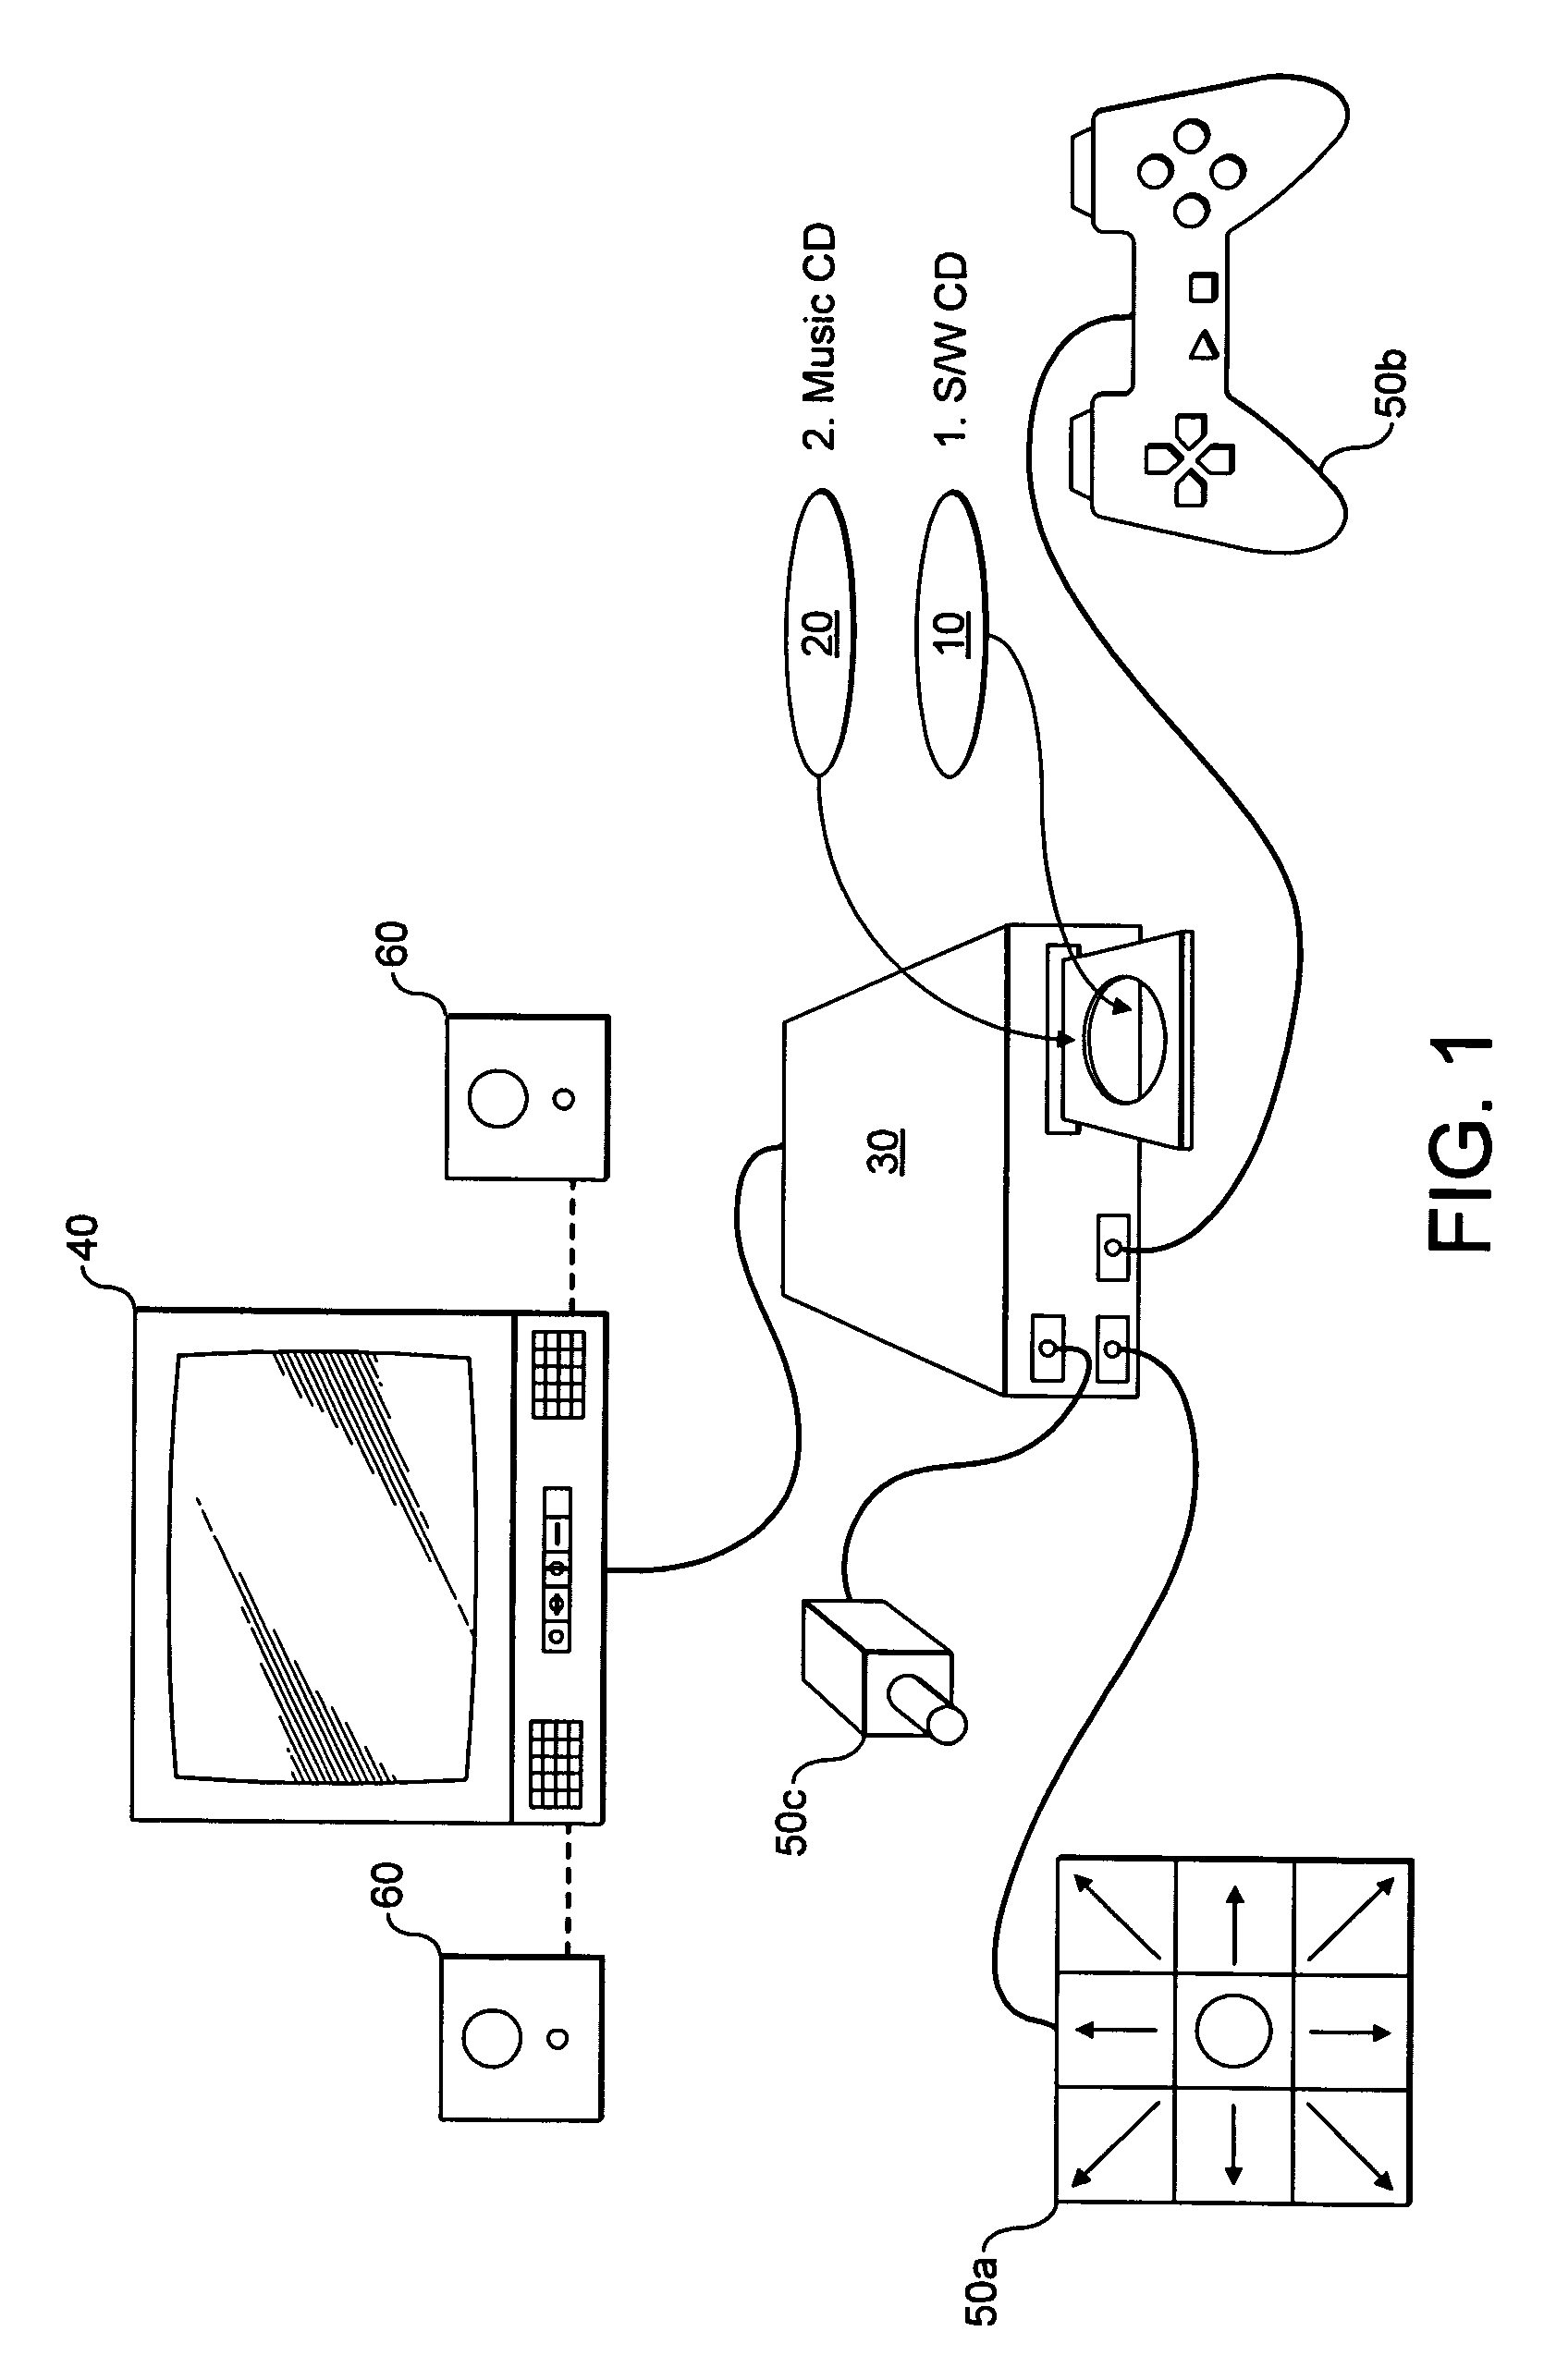 Rhythm action game apparatus and method